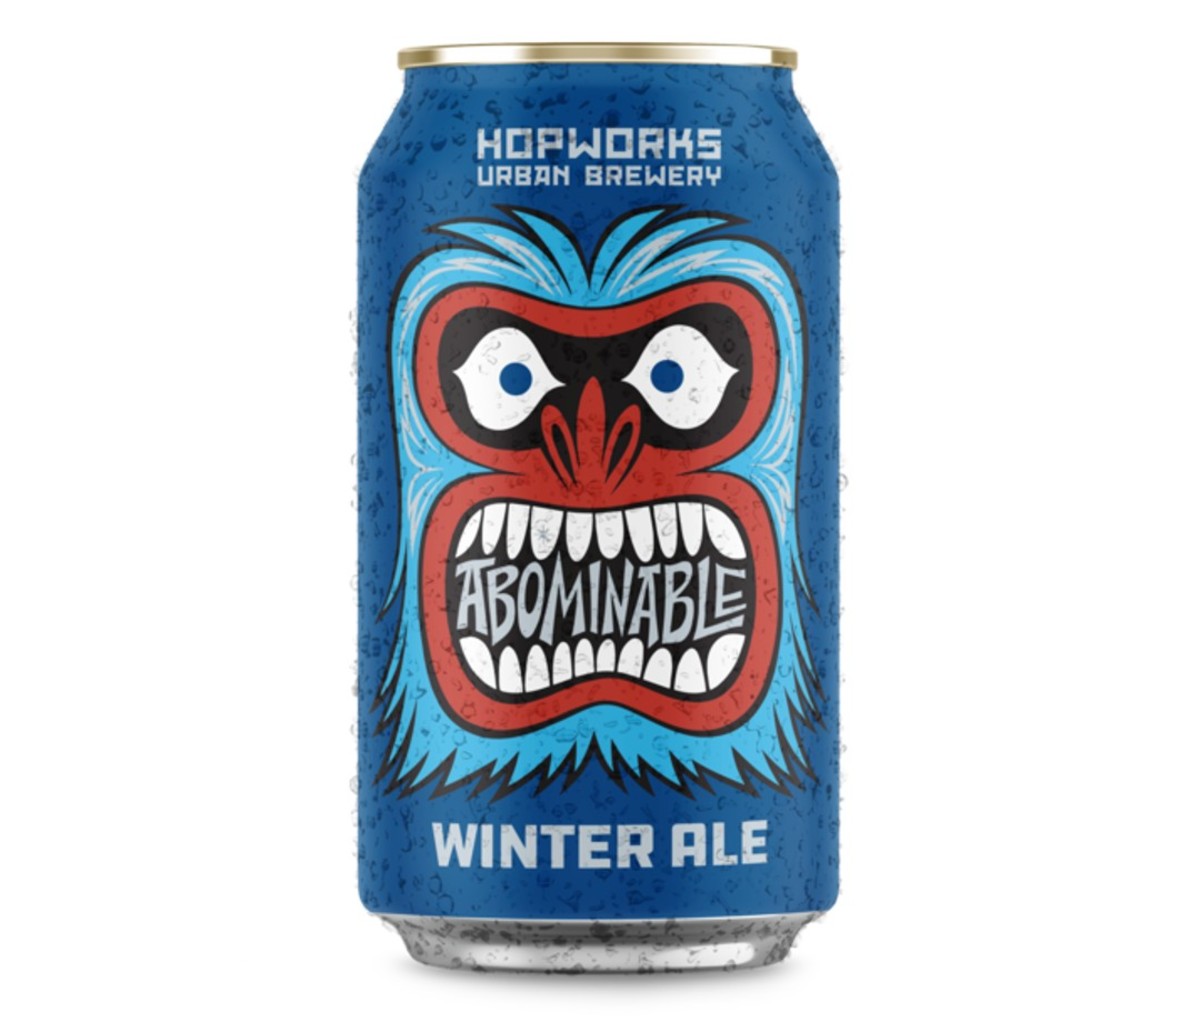 A can of Hopworks Urban Brewery Abomination Winter Ale